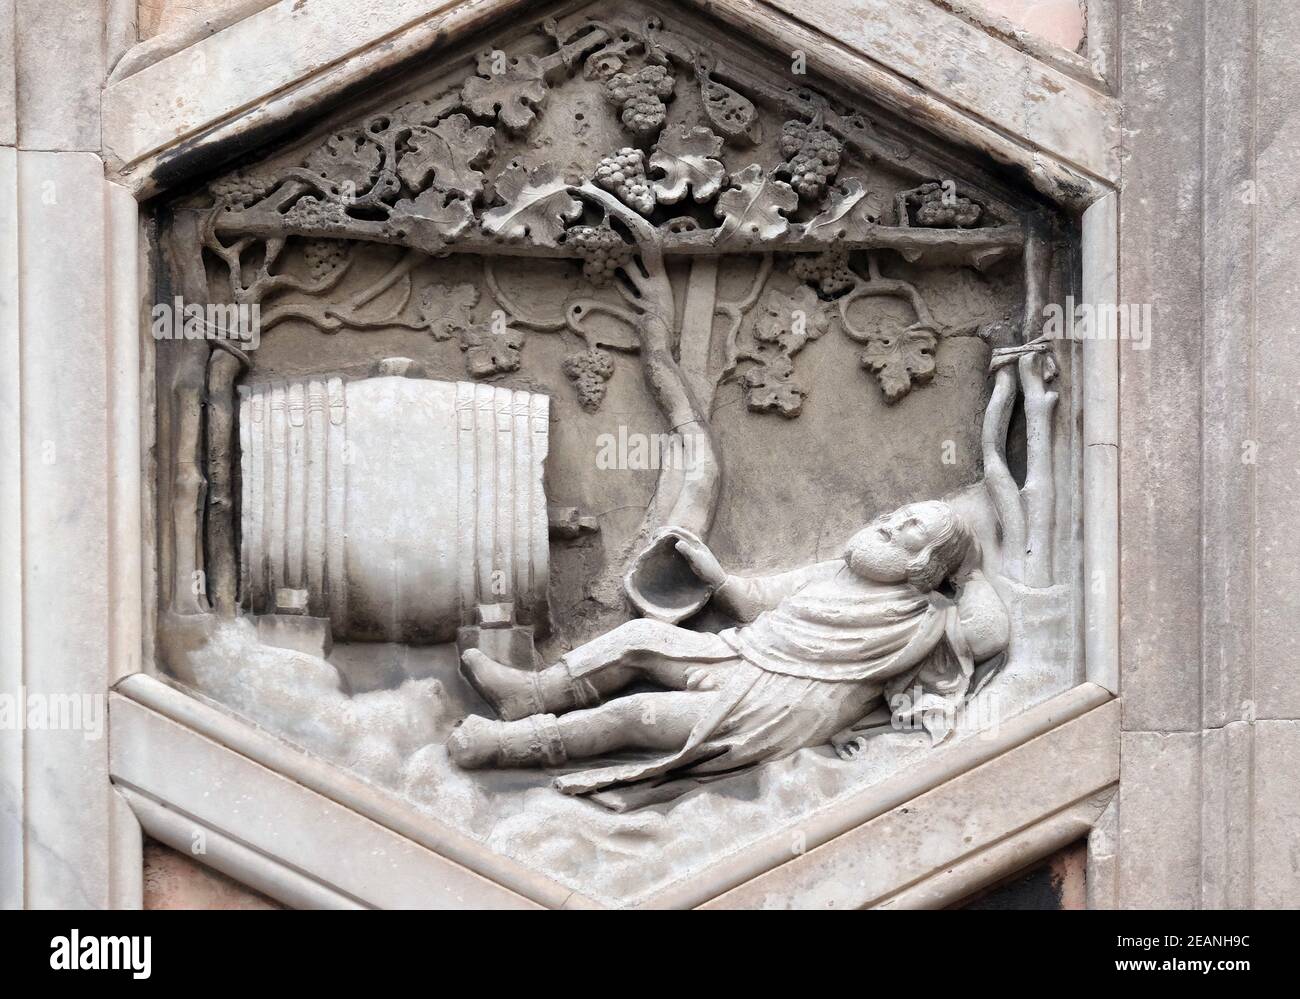 Noah by Collaborator of Andrea Pisano, 1334-36., Relief on Giotto Campanile of Cattedrale di Santa Maria del Fiore (Cathedral of Saint Mary of the Flower), Florence, Italy Stock Photo